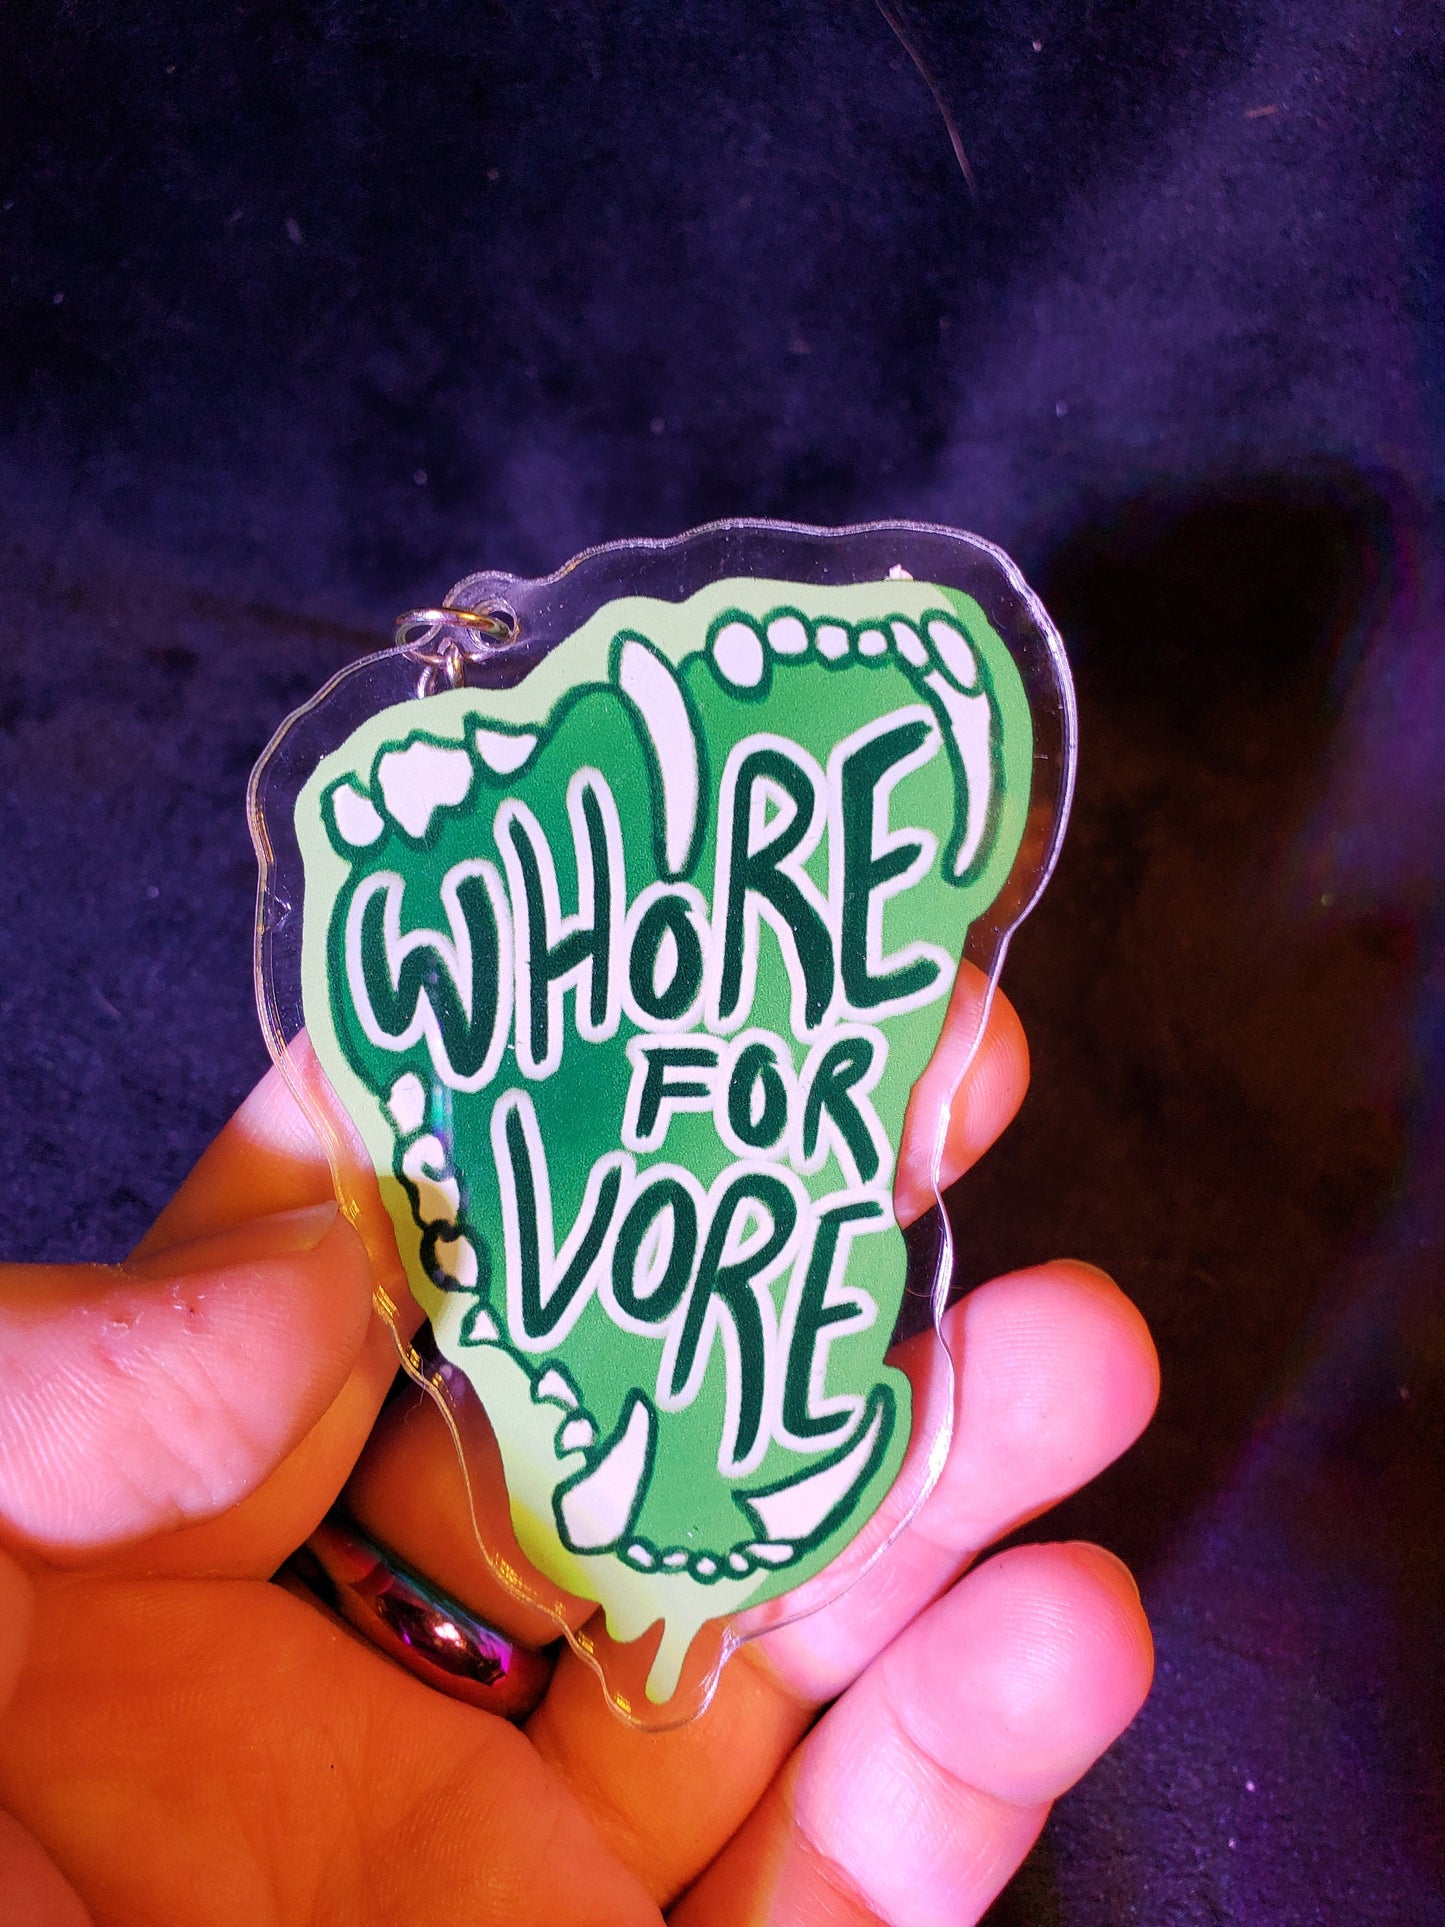 WHORE FOR VORE CHARM